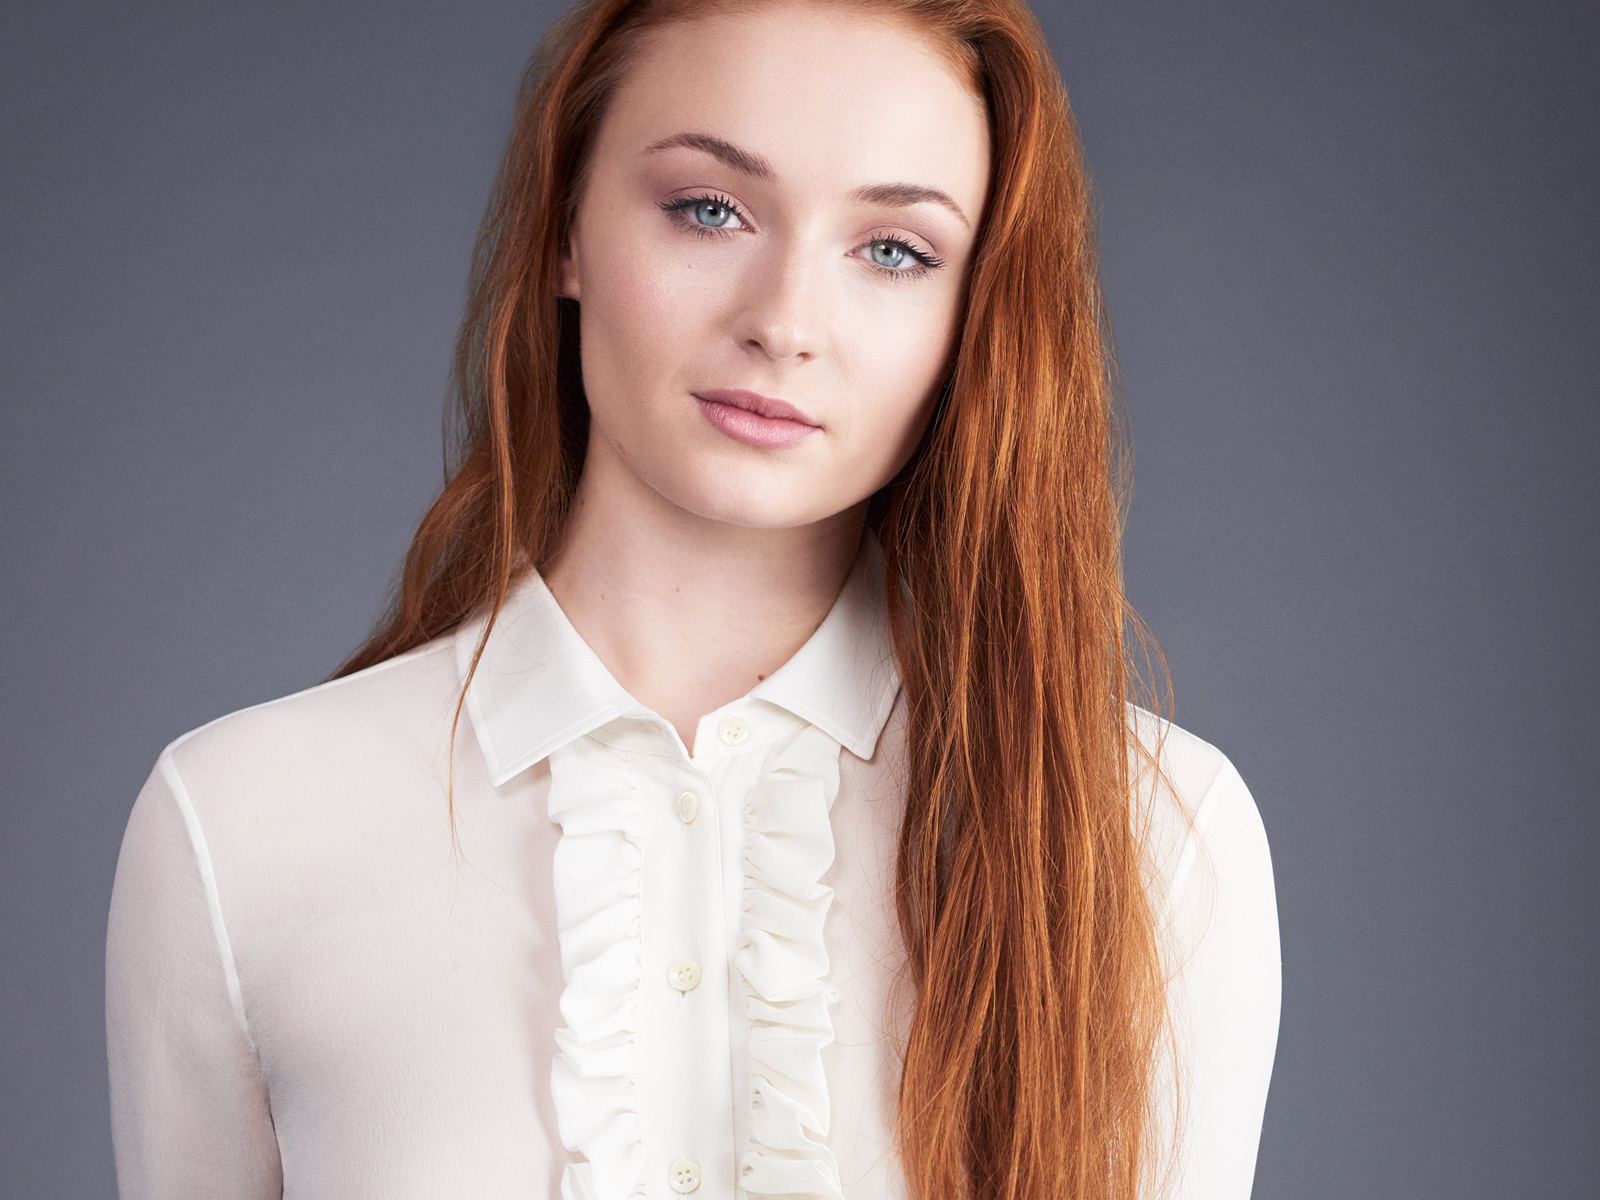 1. Courtney with red hair and blue eyes - wide 3